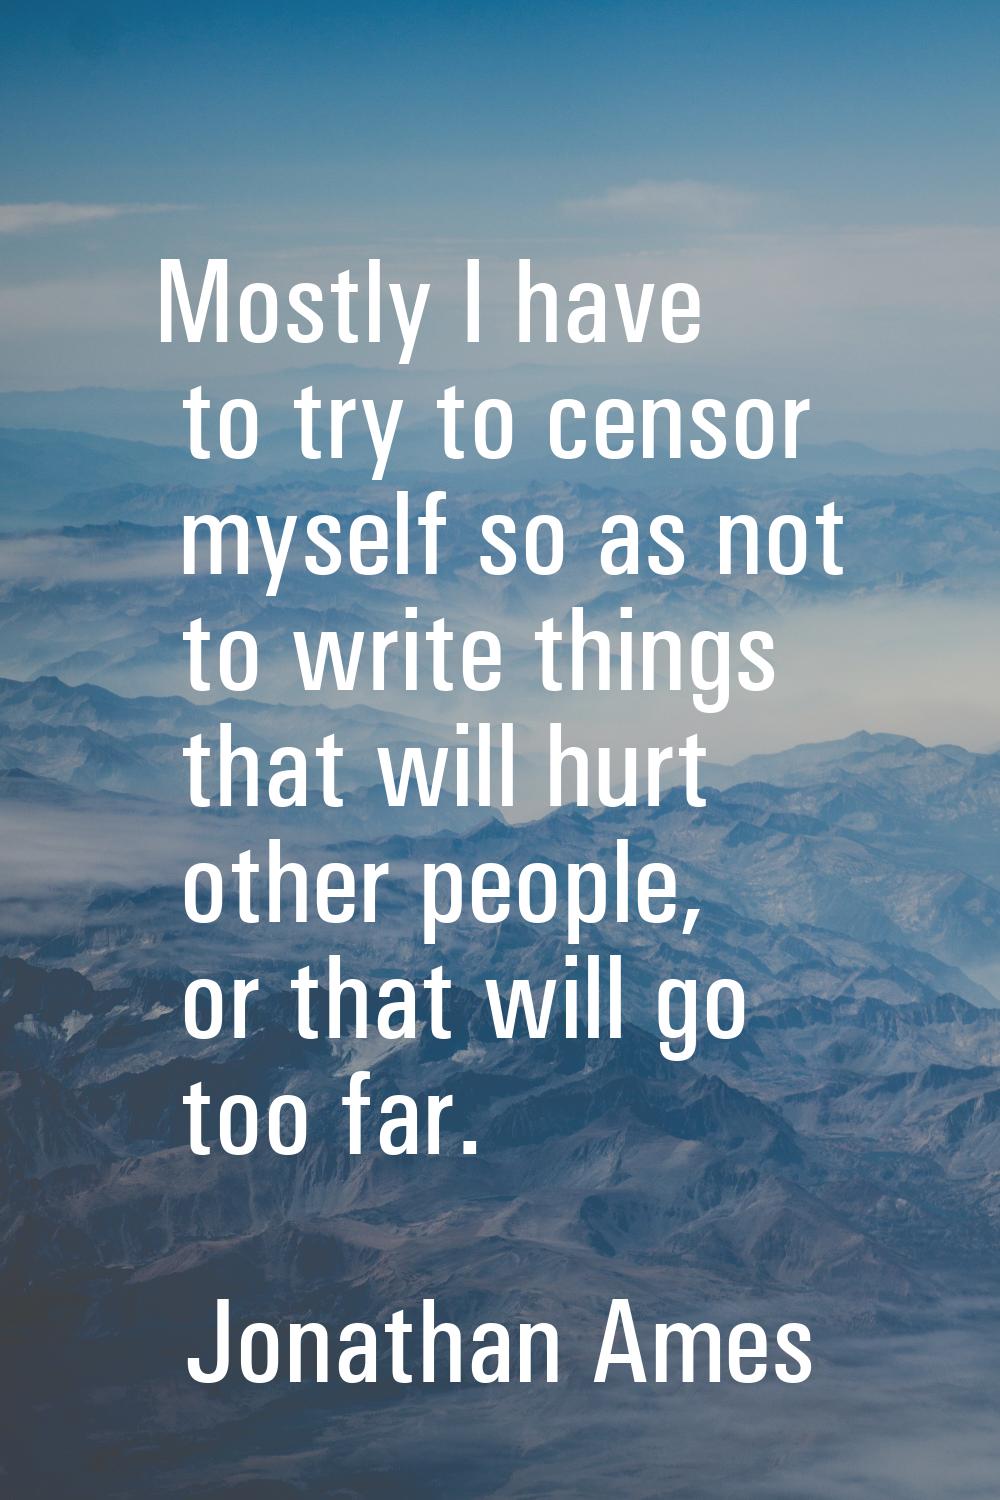 Mostly I have to try to censor myself so as not to write things that will hurt other people, or tha